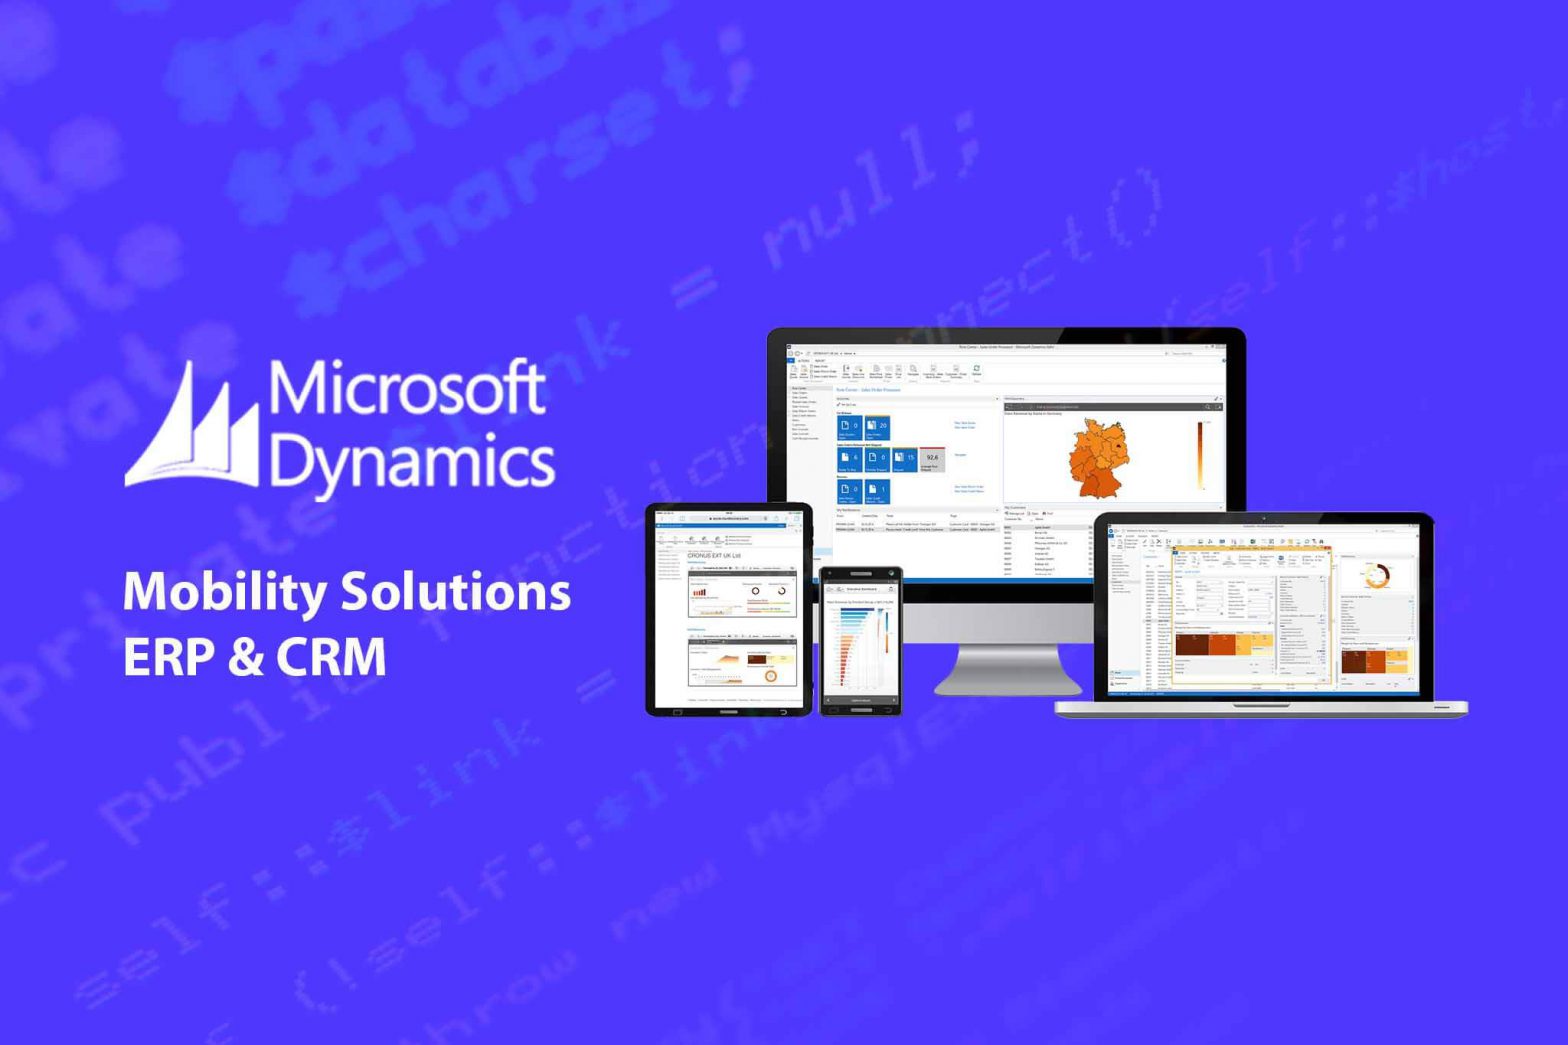 Microsoft-Dynamics-Mobility-solutions-ERP-CRM